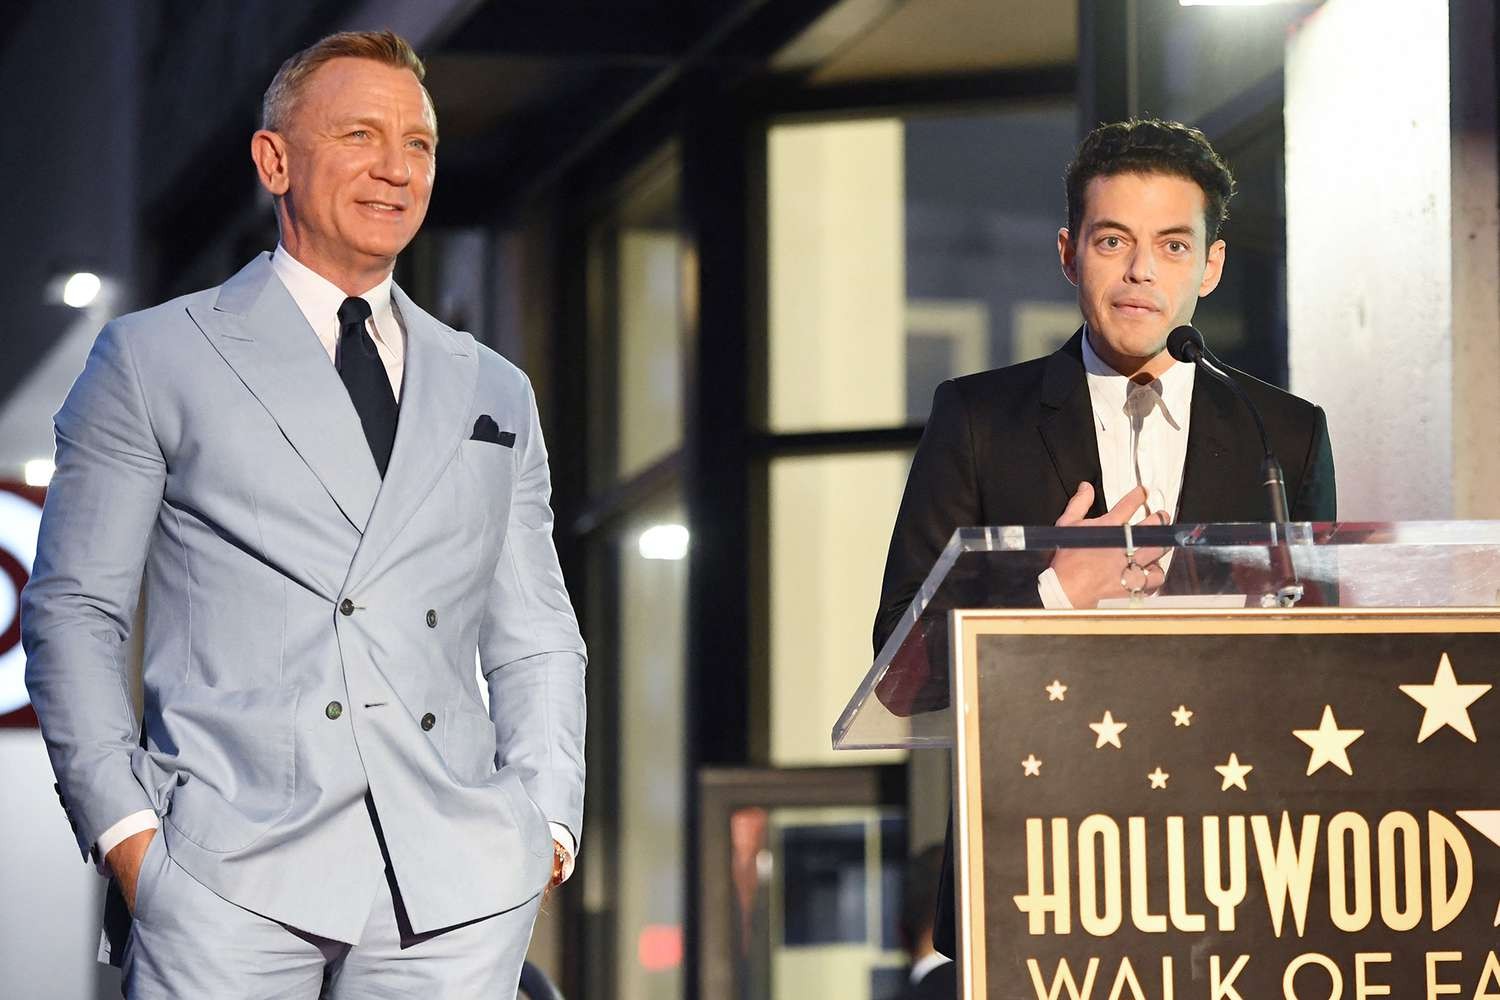 Rami Malek speaking at the event where Daniel Craig is awarded a star on Hollywood Walk of Fame